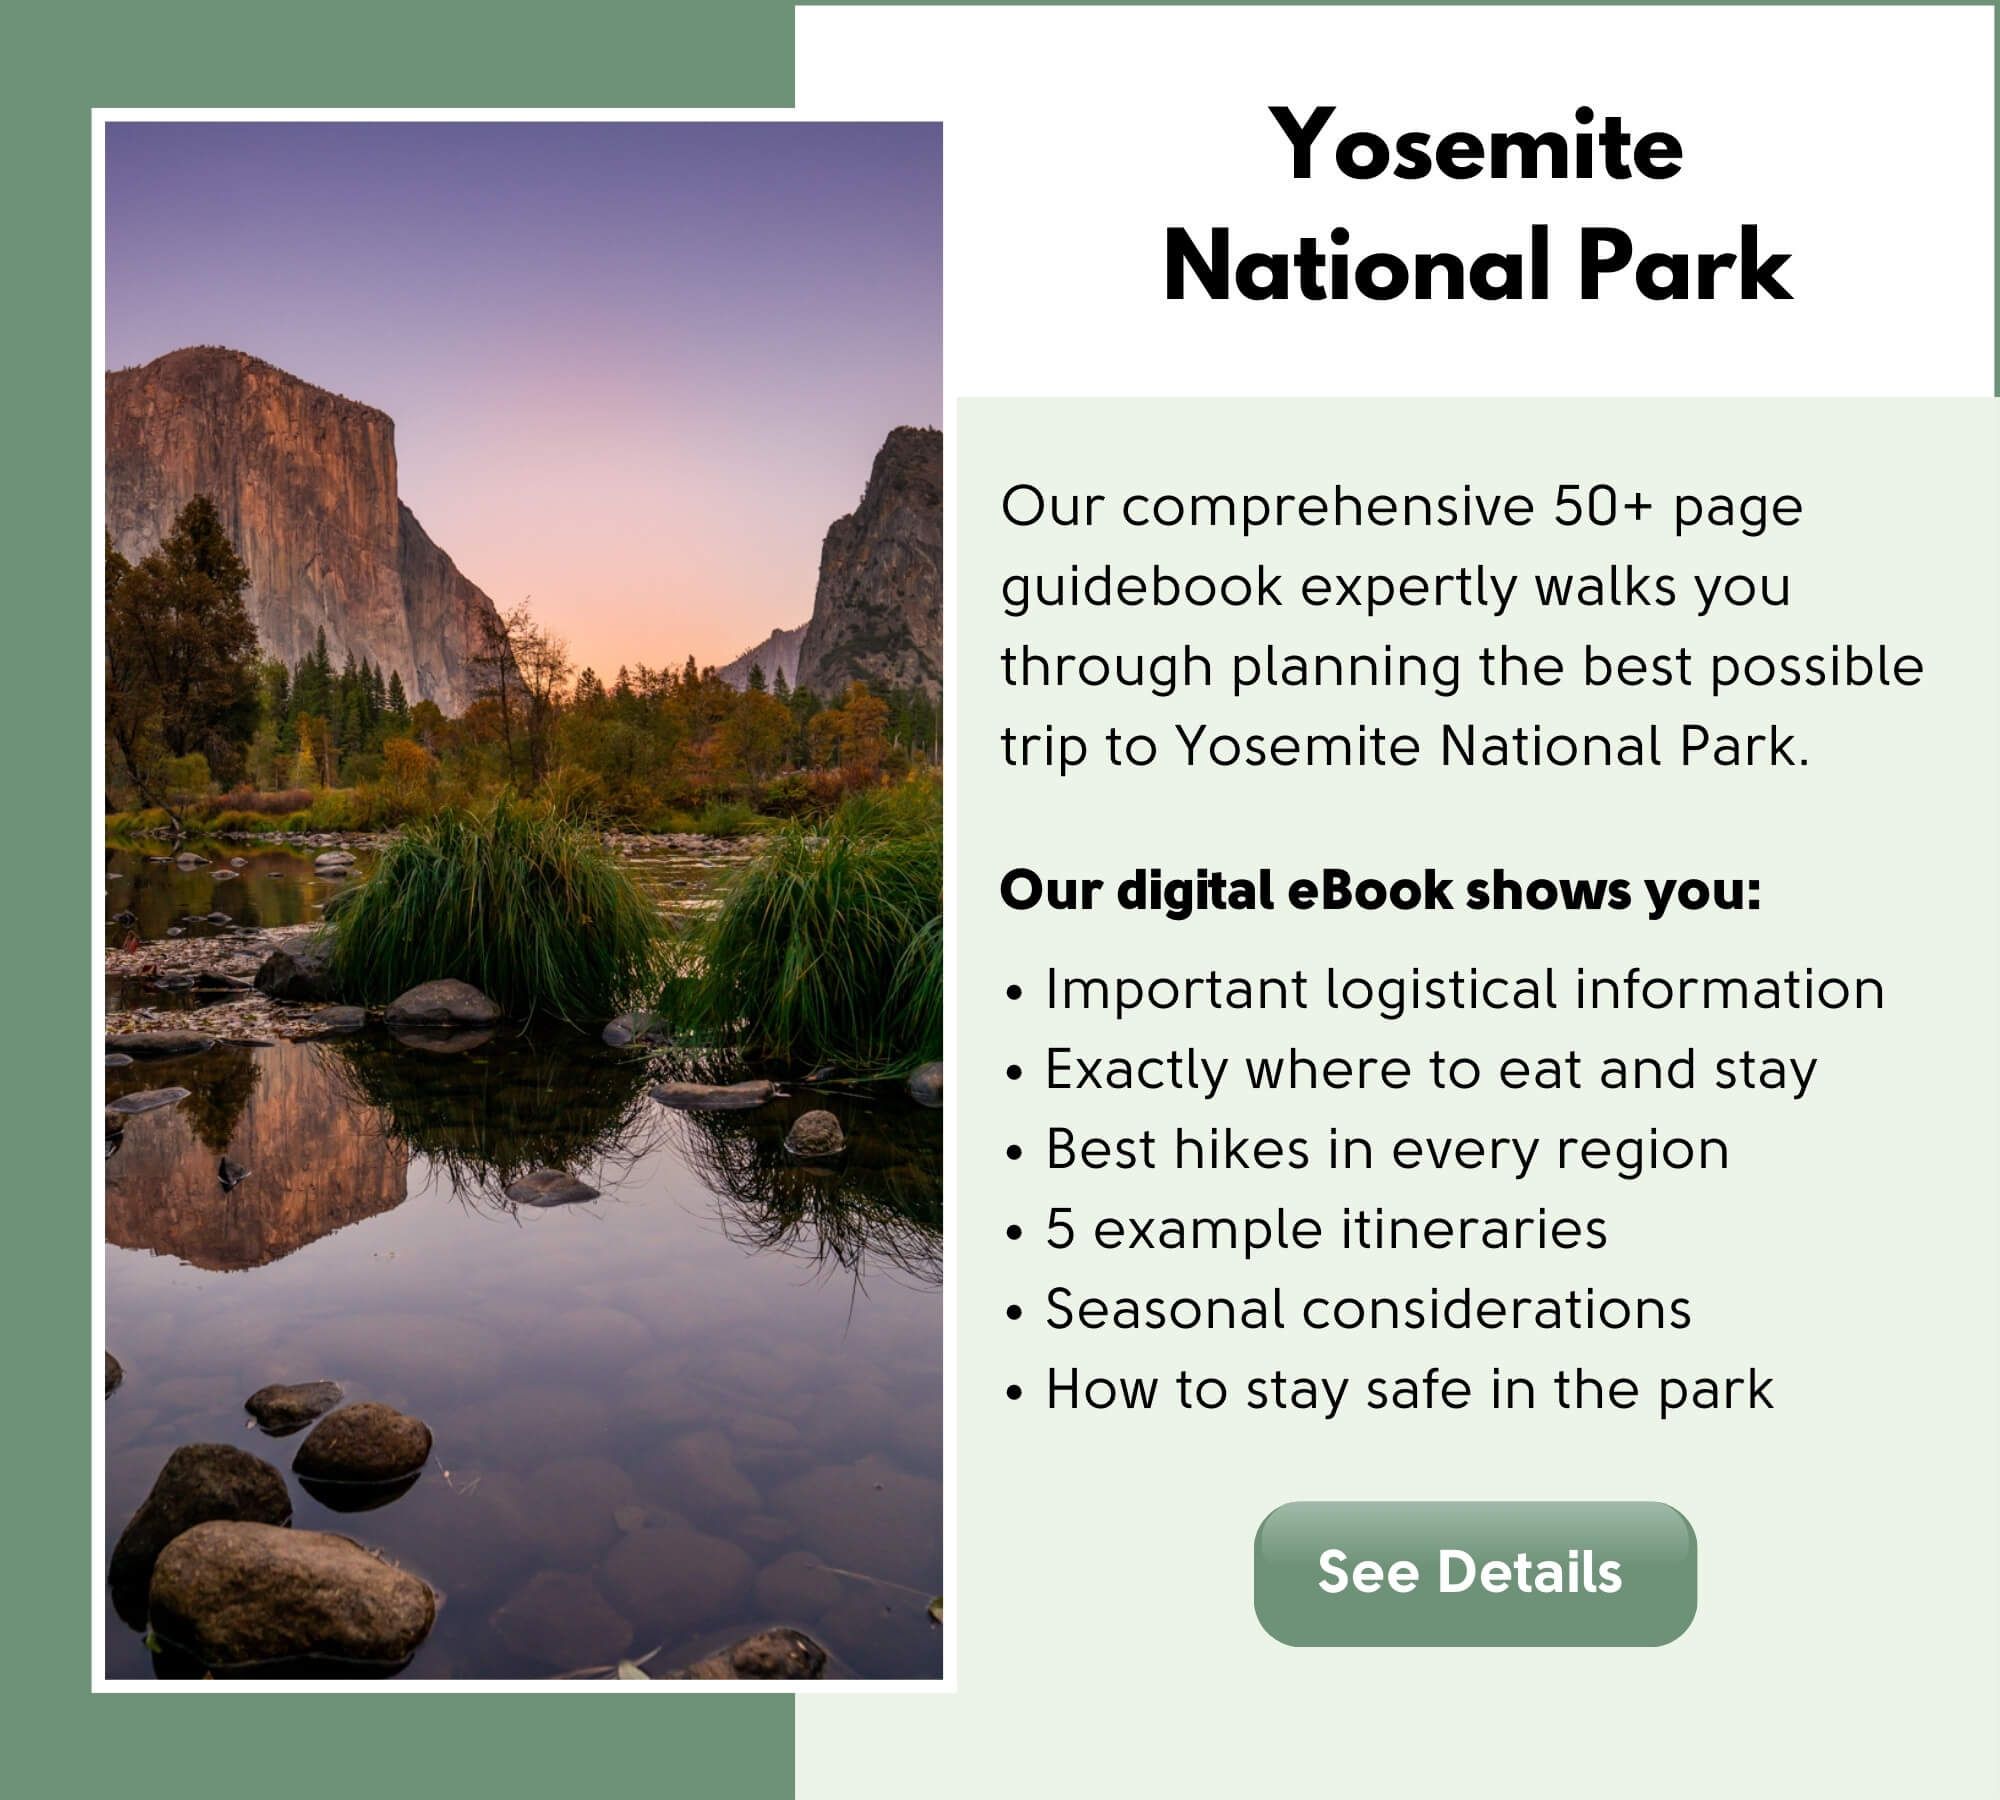 Yosemite National Park Travel Guidebook by Where Are Those Morgans